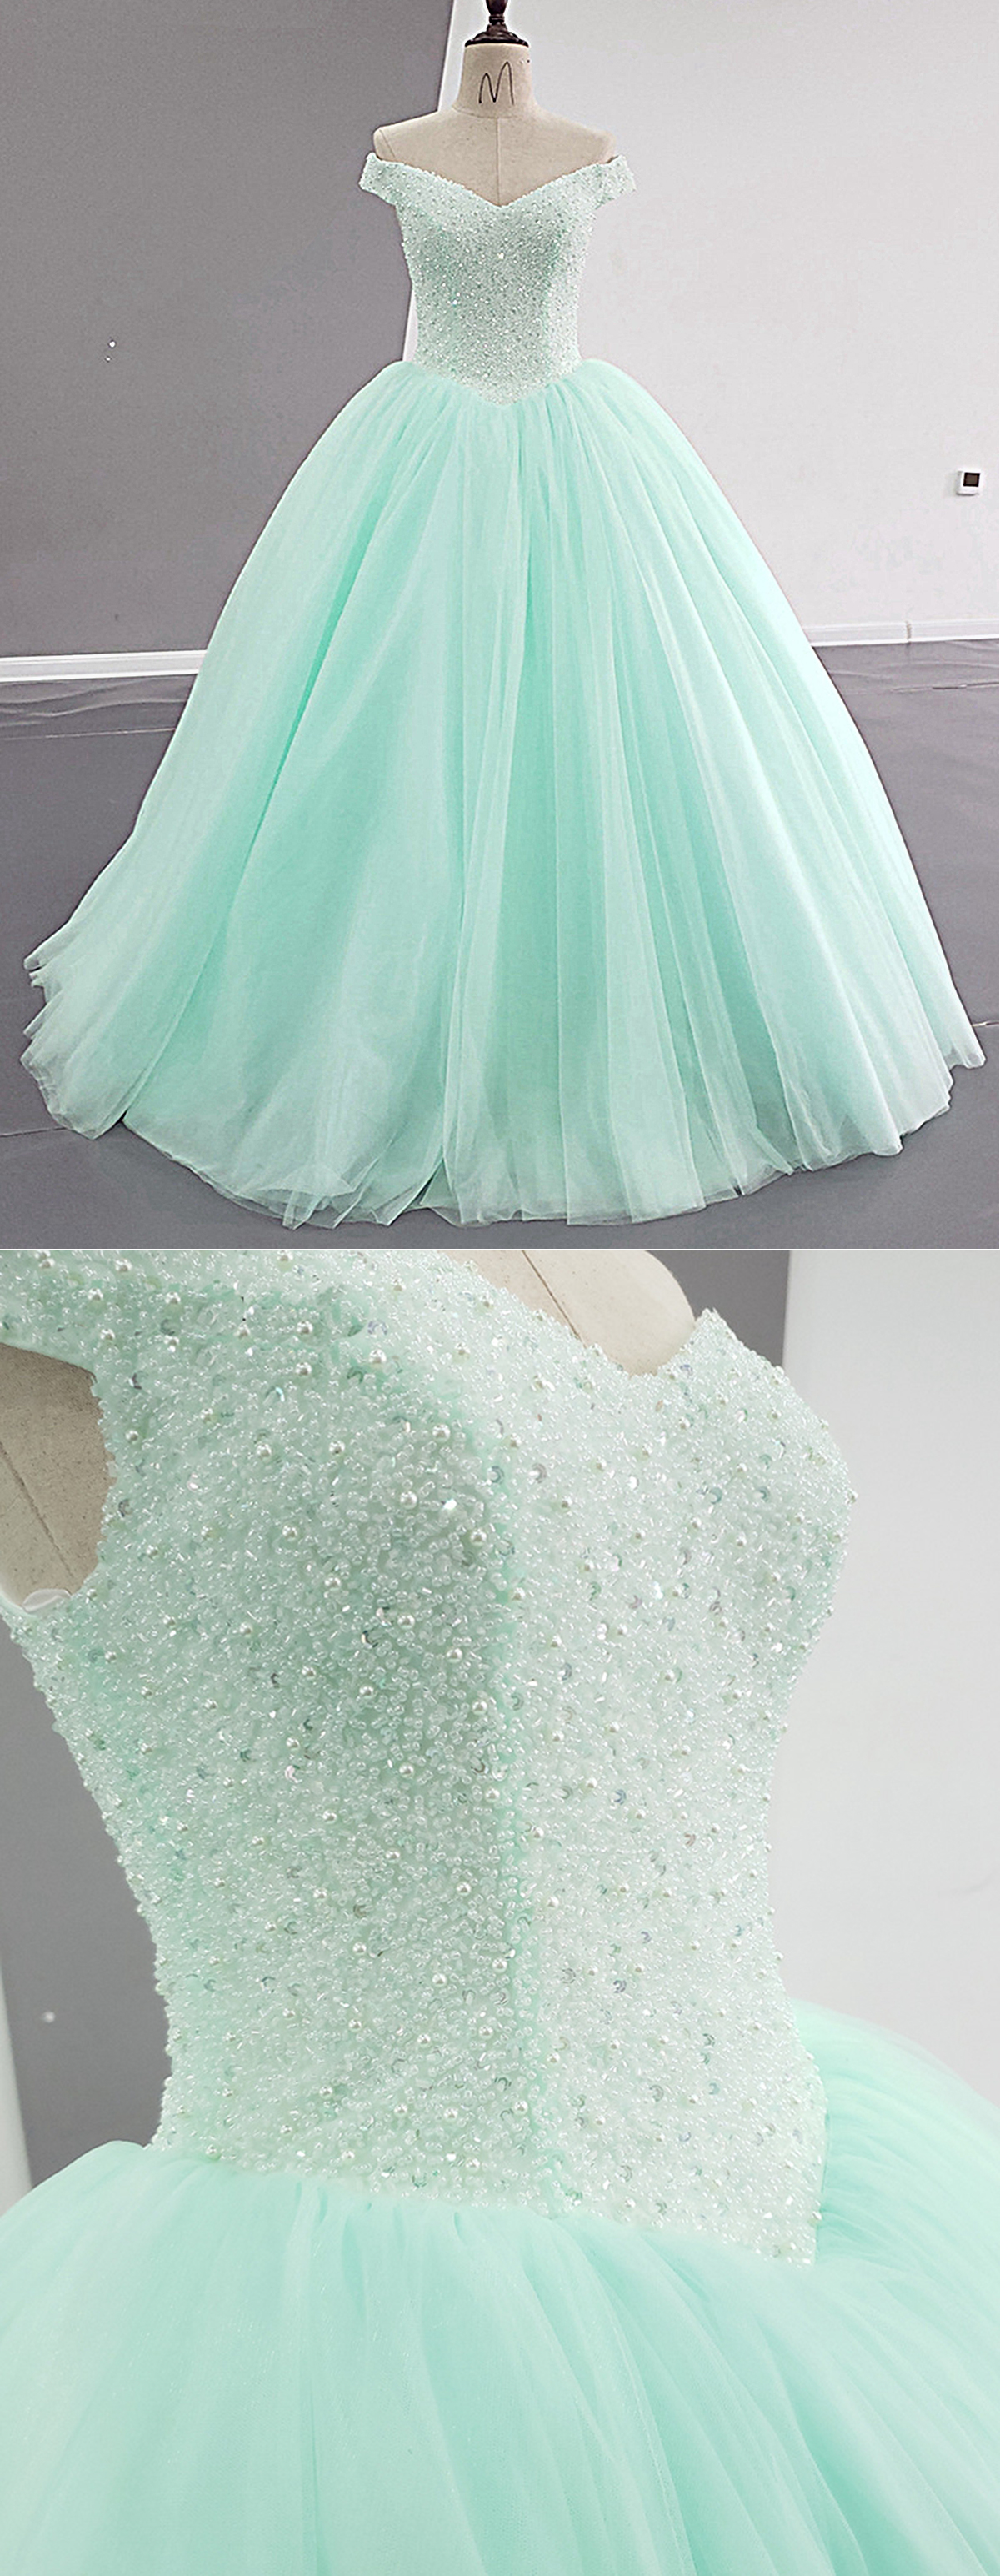 Mint Tulle Beaded Long V Neck Puffy Prom Dress, Quinceanera Dress